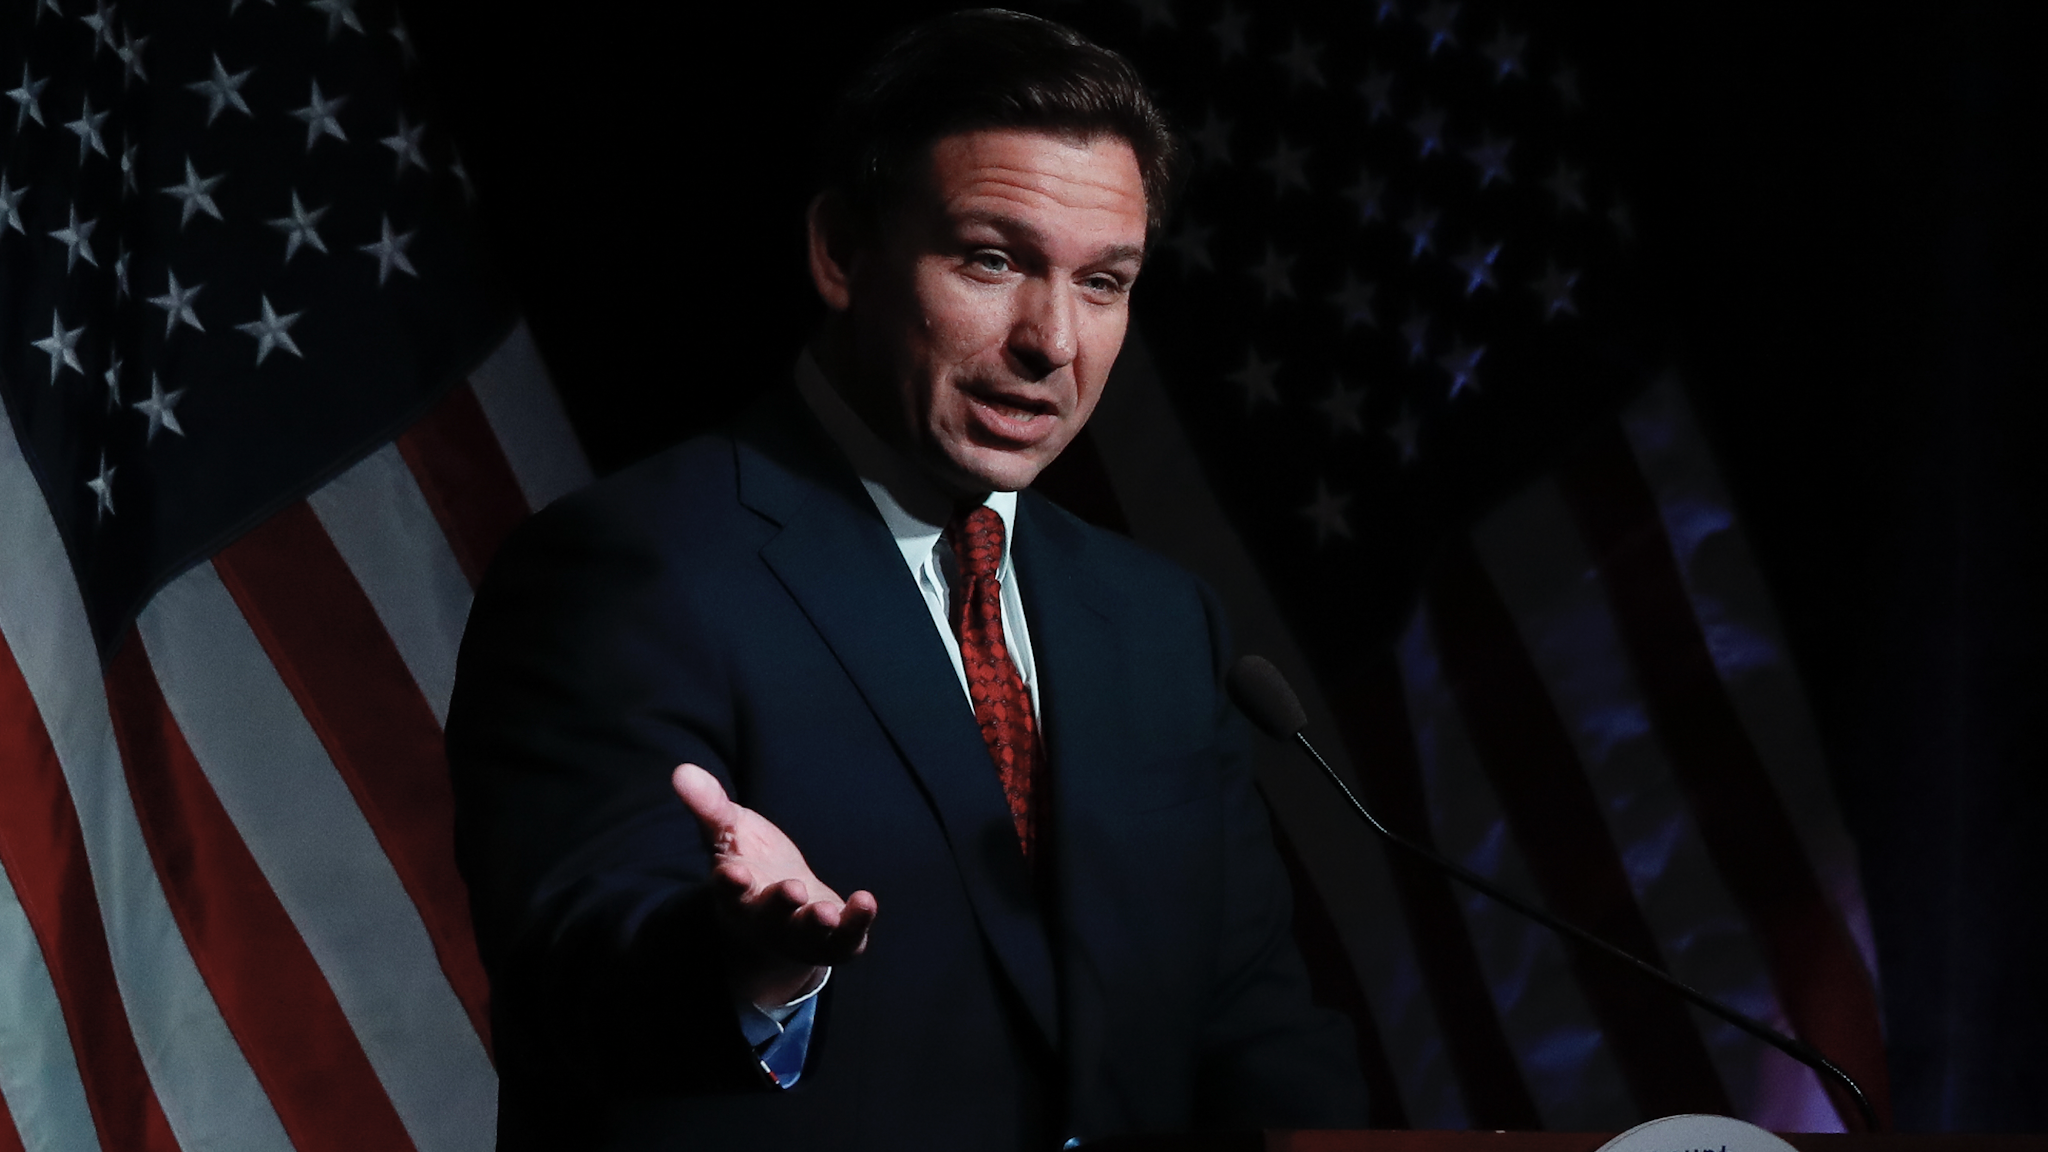 MIDLAND, MI - APRIL 06: Florida Gov. Ron DeSantis speaks at the Midland County Republican Party Dave Camp Spring Breakfast on April 6, 2023 in Midland, Michigan. While in Michigan, DeSantis will also visit Hillsdale College, a small, Christian liberal arts school.